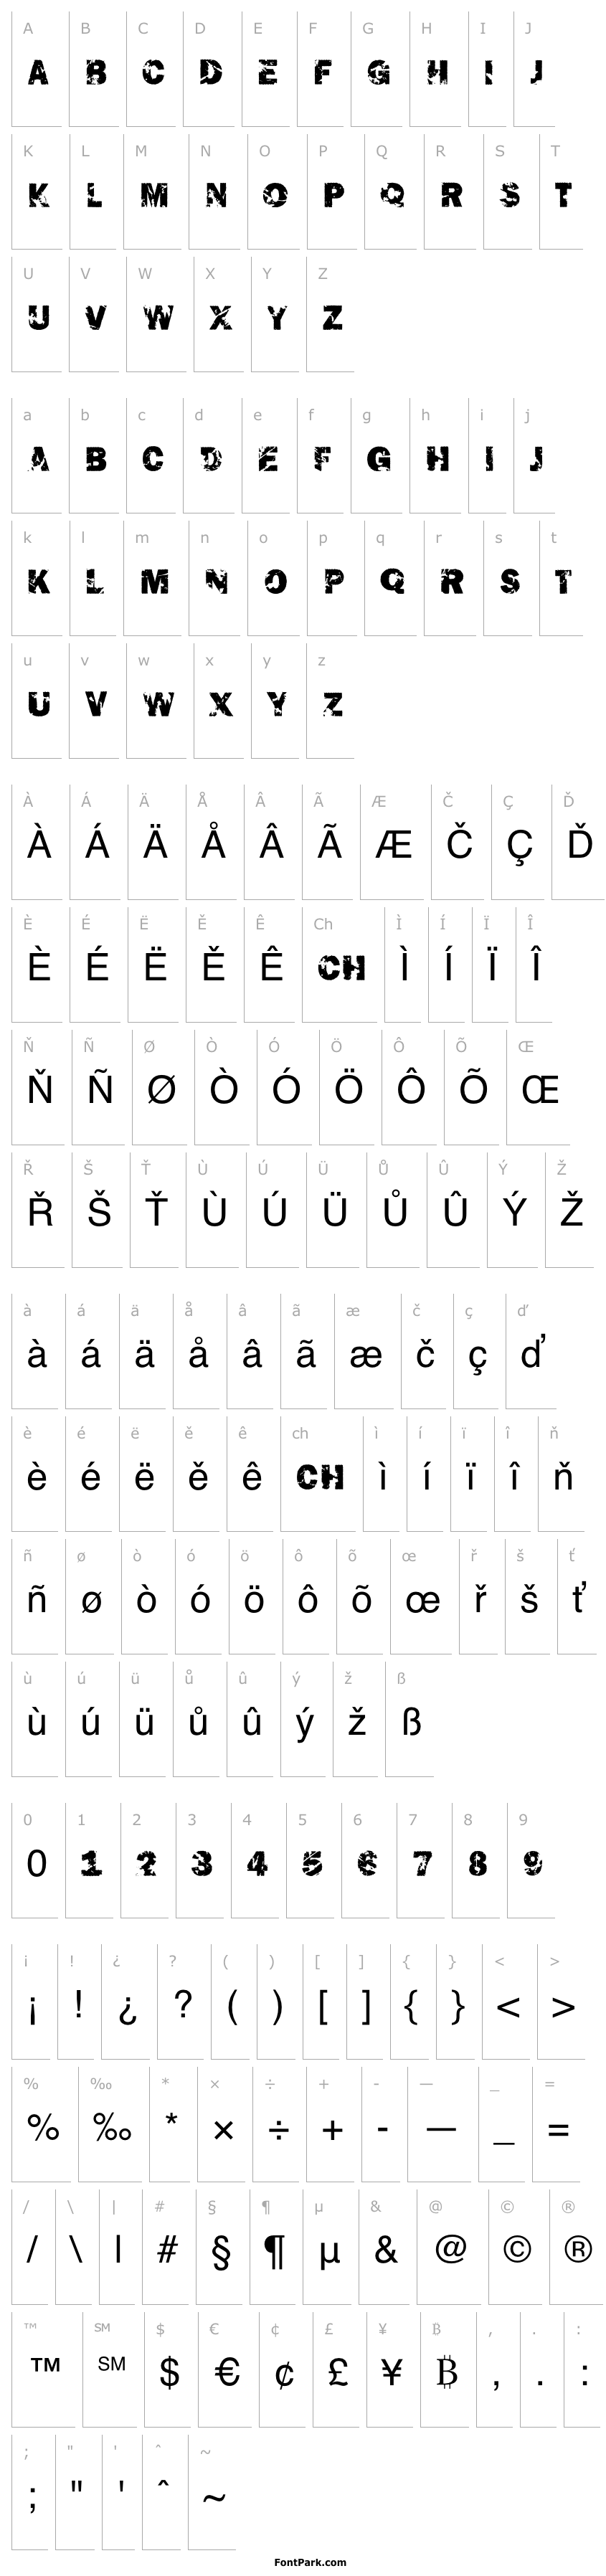 Overview The End Font